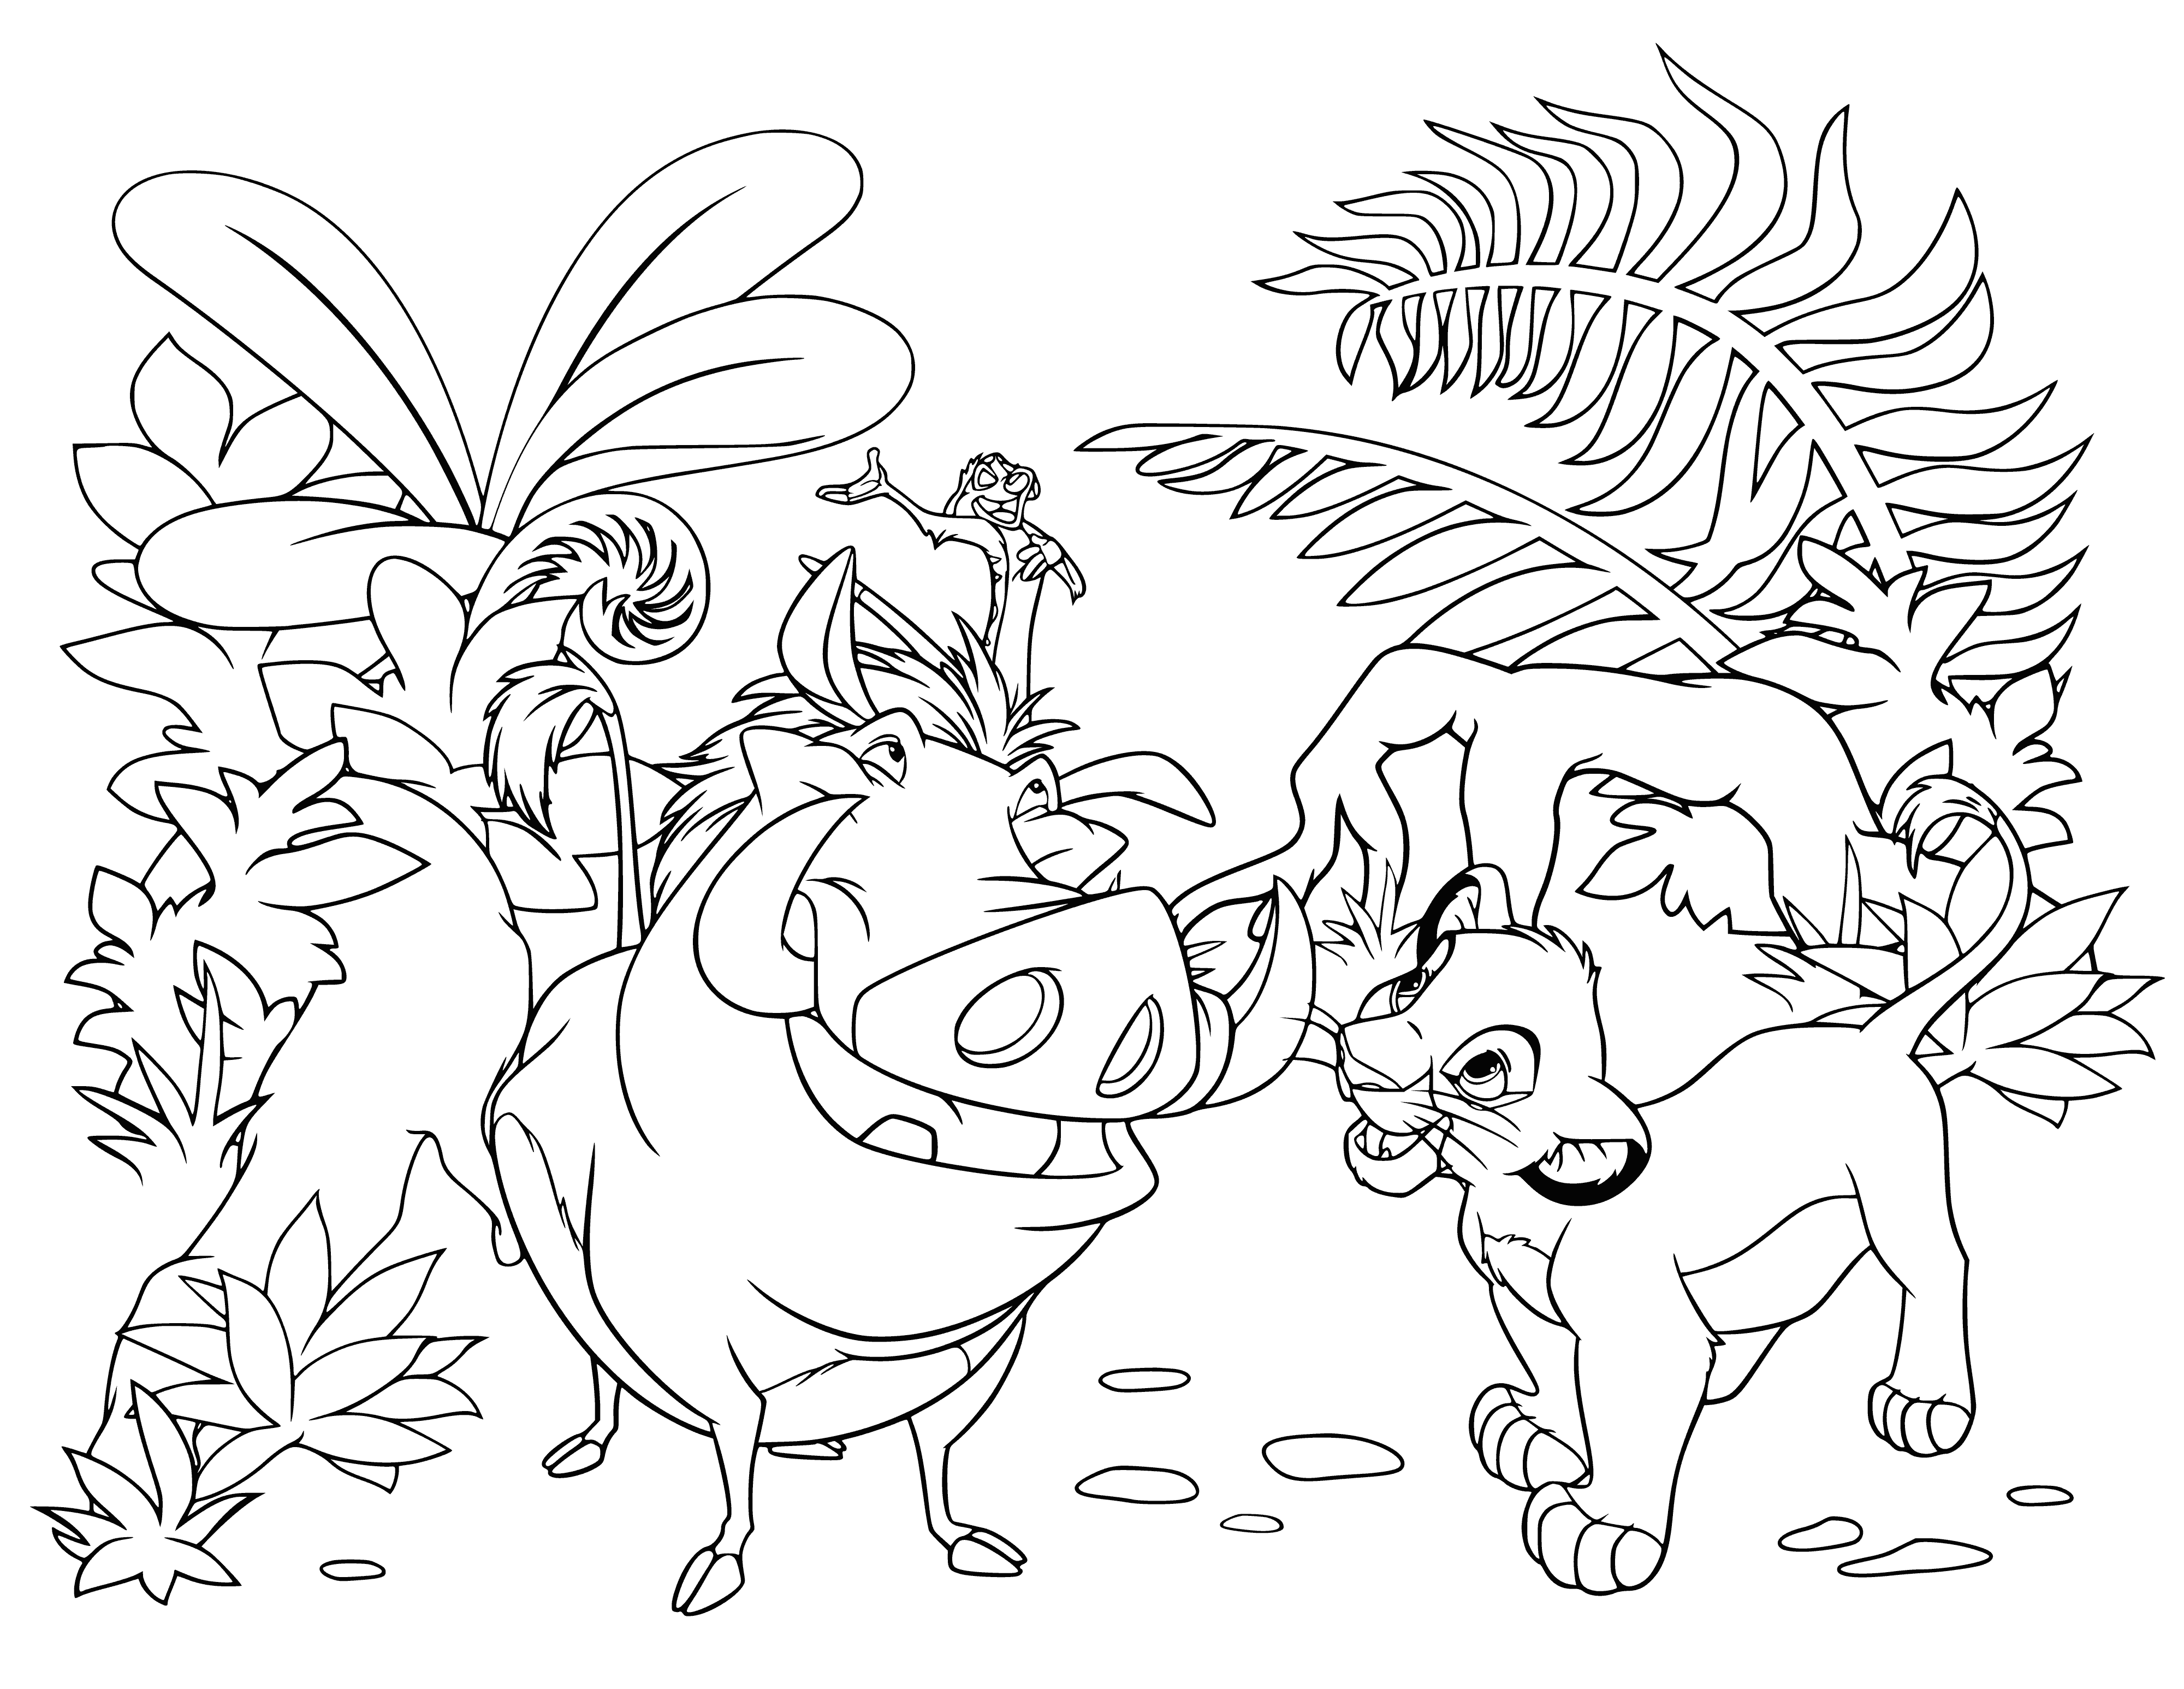 coloring page: Three friendly animals—lion, warthog, and meerkat—all in one coloring page! #CutenessOverload